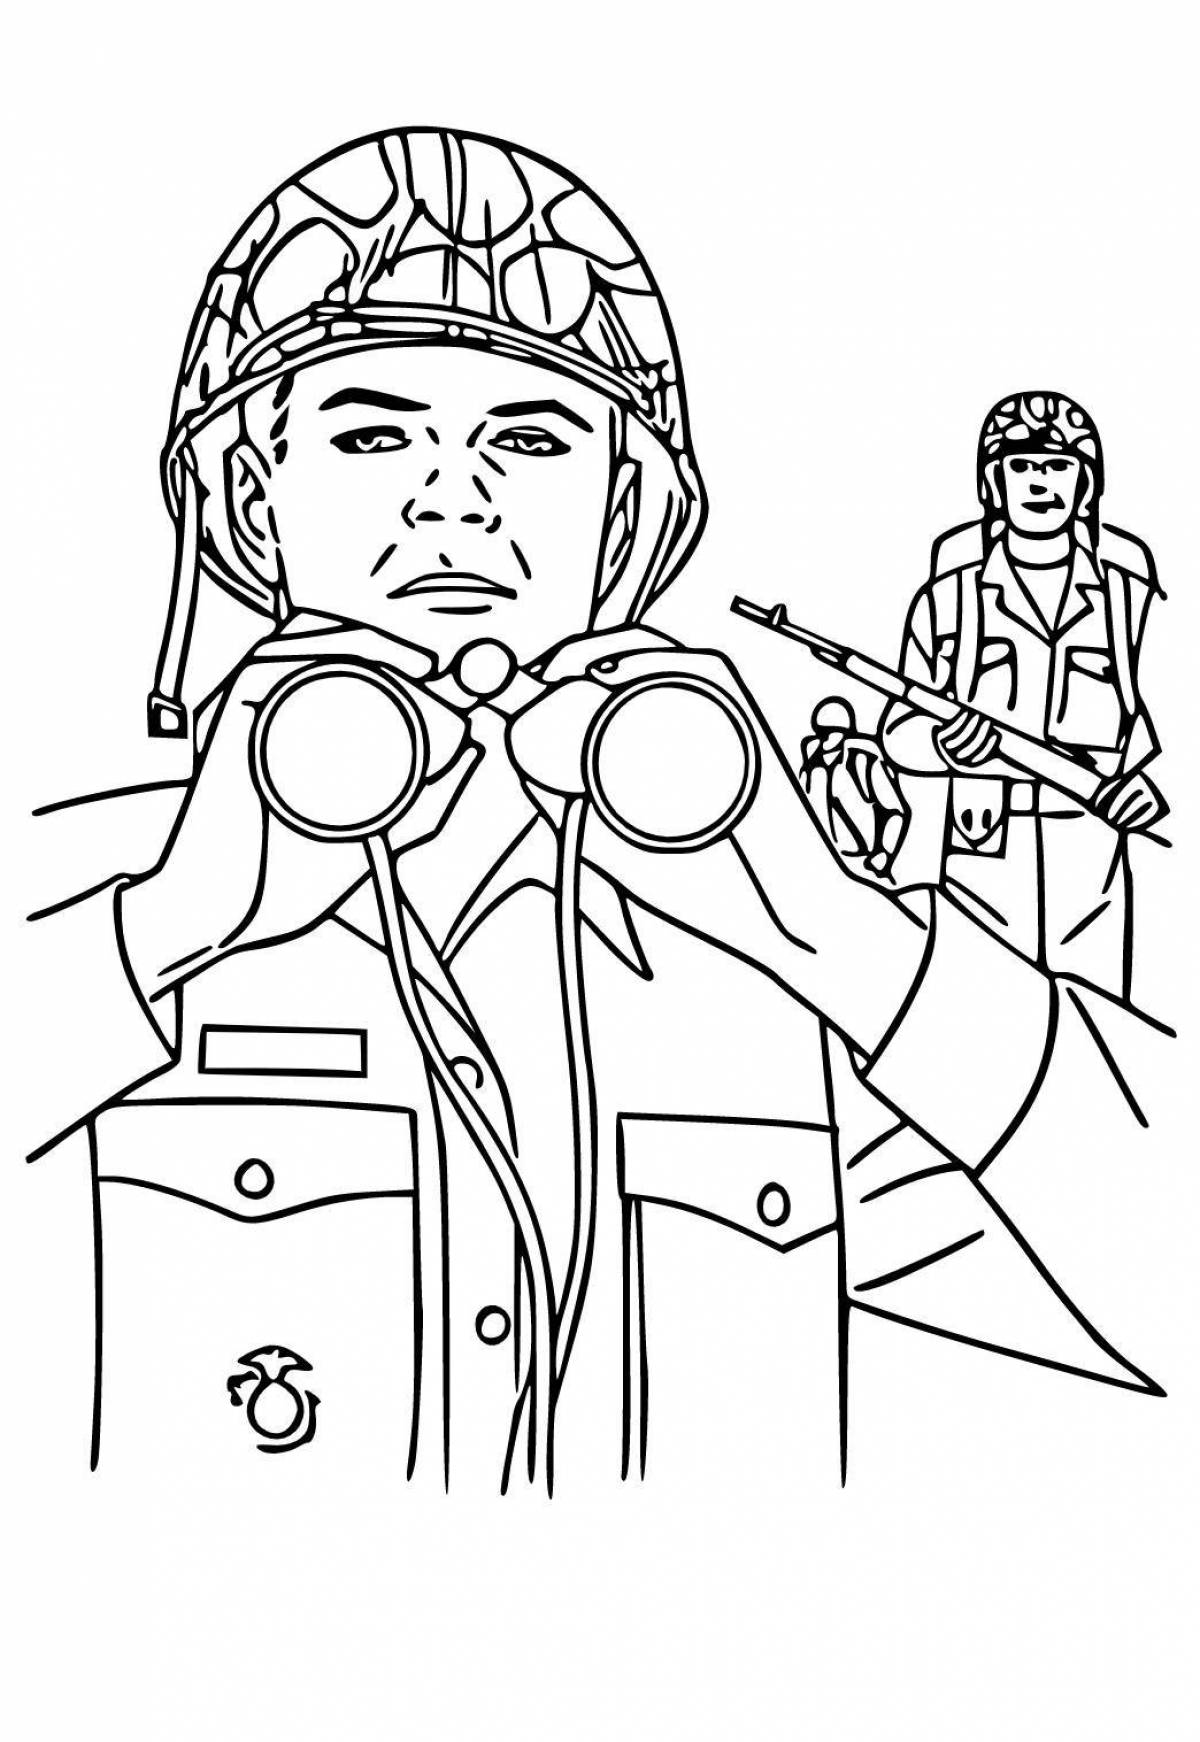 Coloring page funny patriotic music